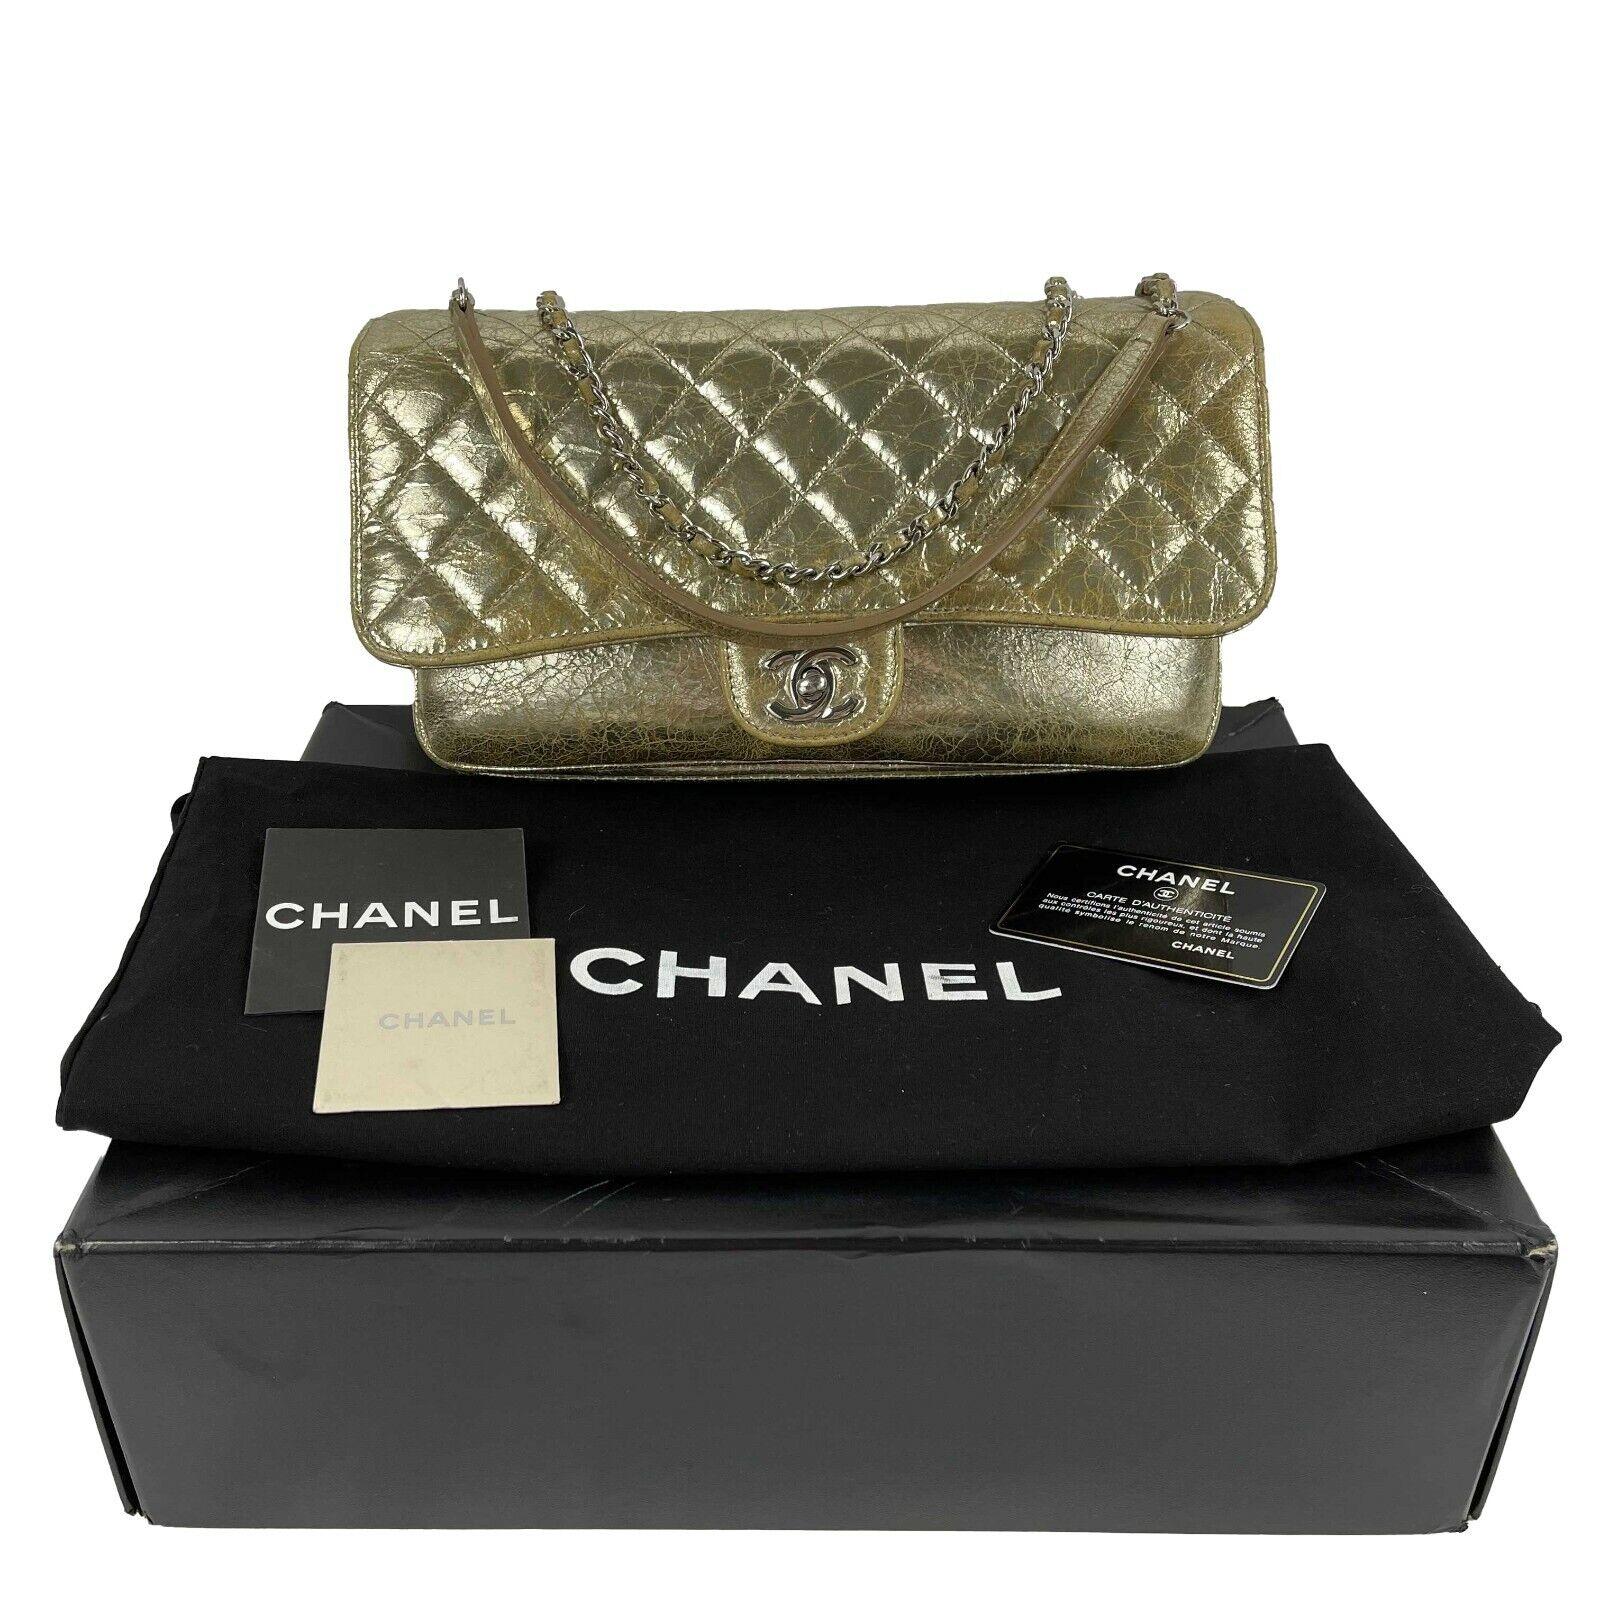 CHANEL Quilted Distressed Glazed Gold Leather Accordion Flap Shoulder Bag Medium 8